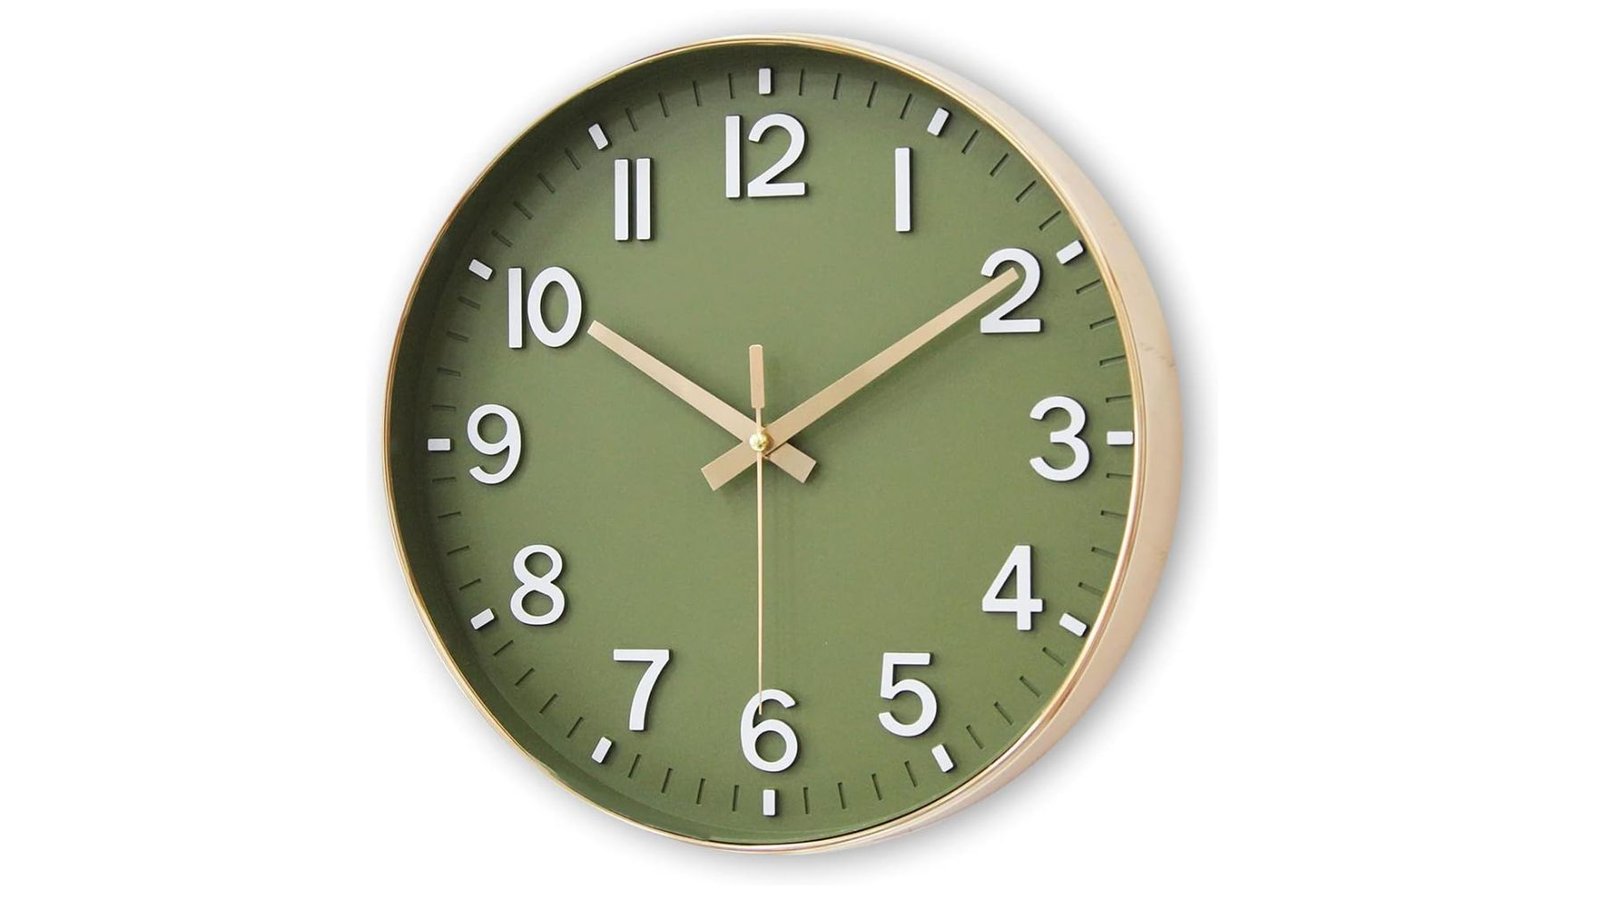 HZDHCLH 12-inch Silent Non-Ticking Office Room Wall Clock Review